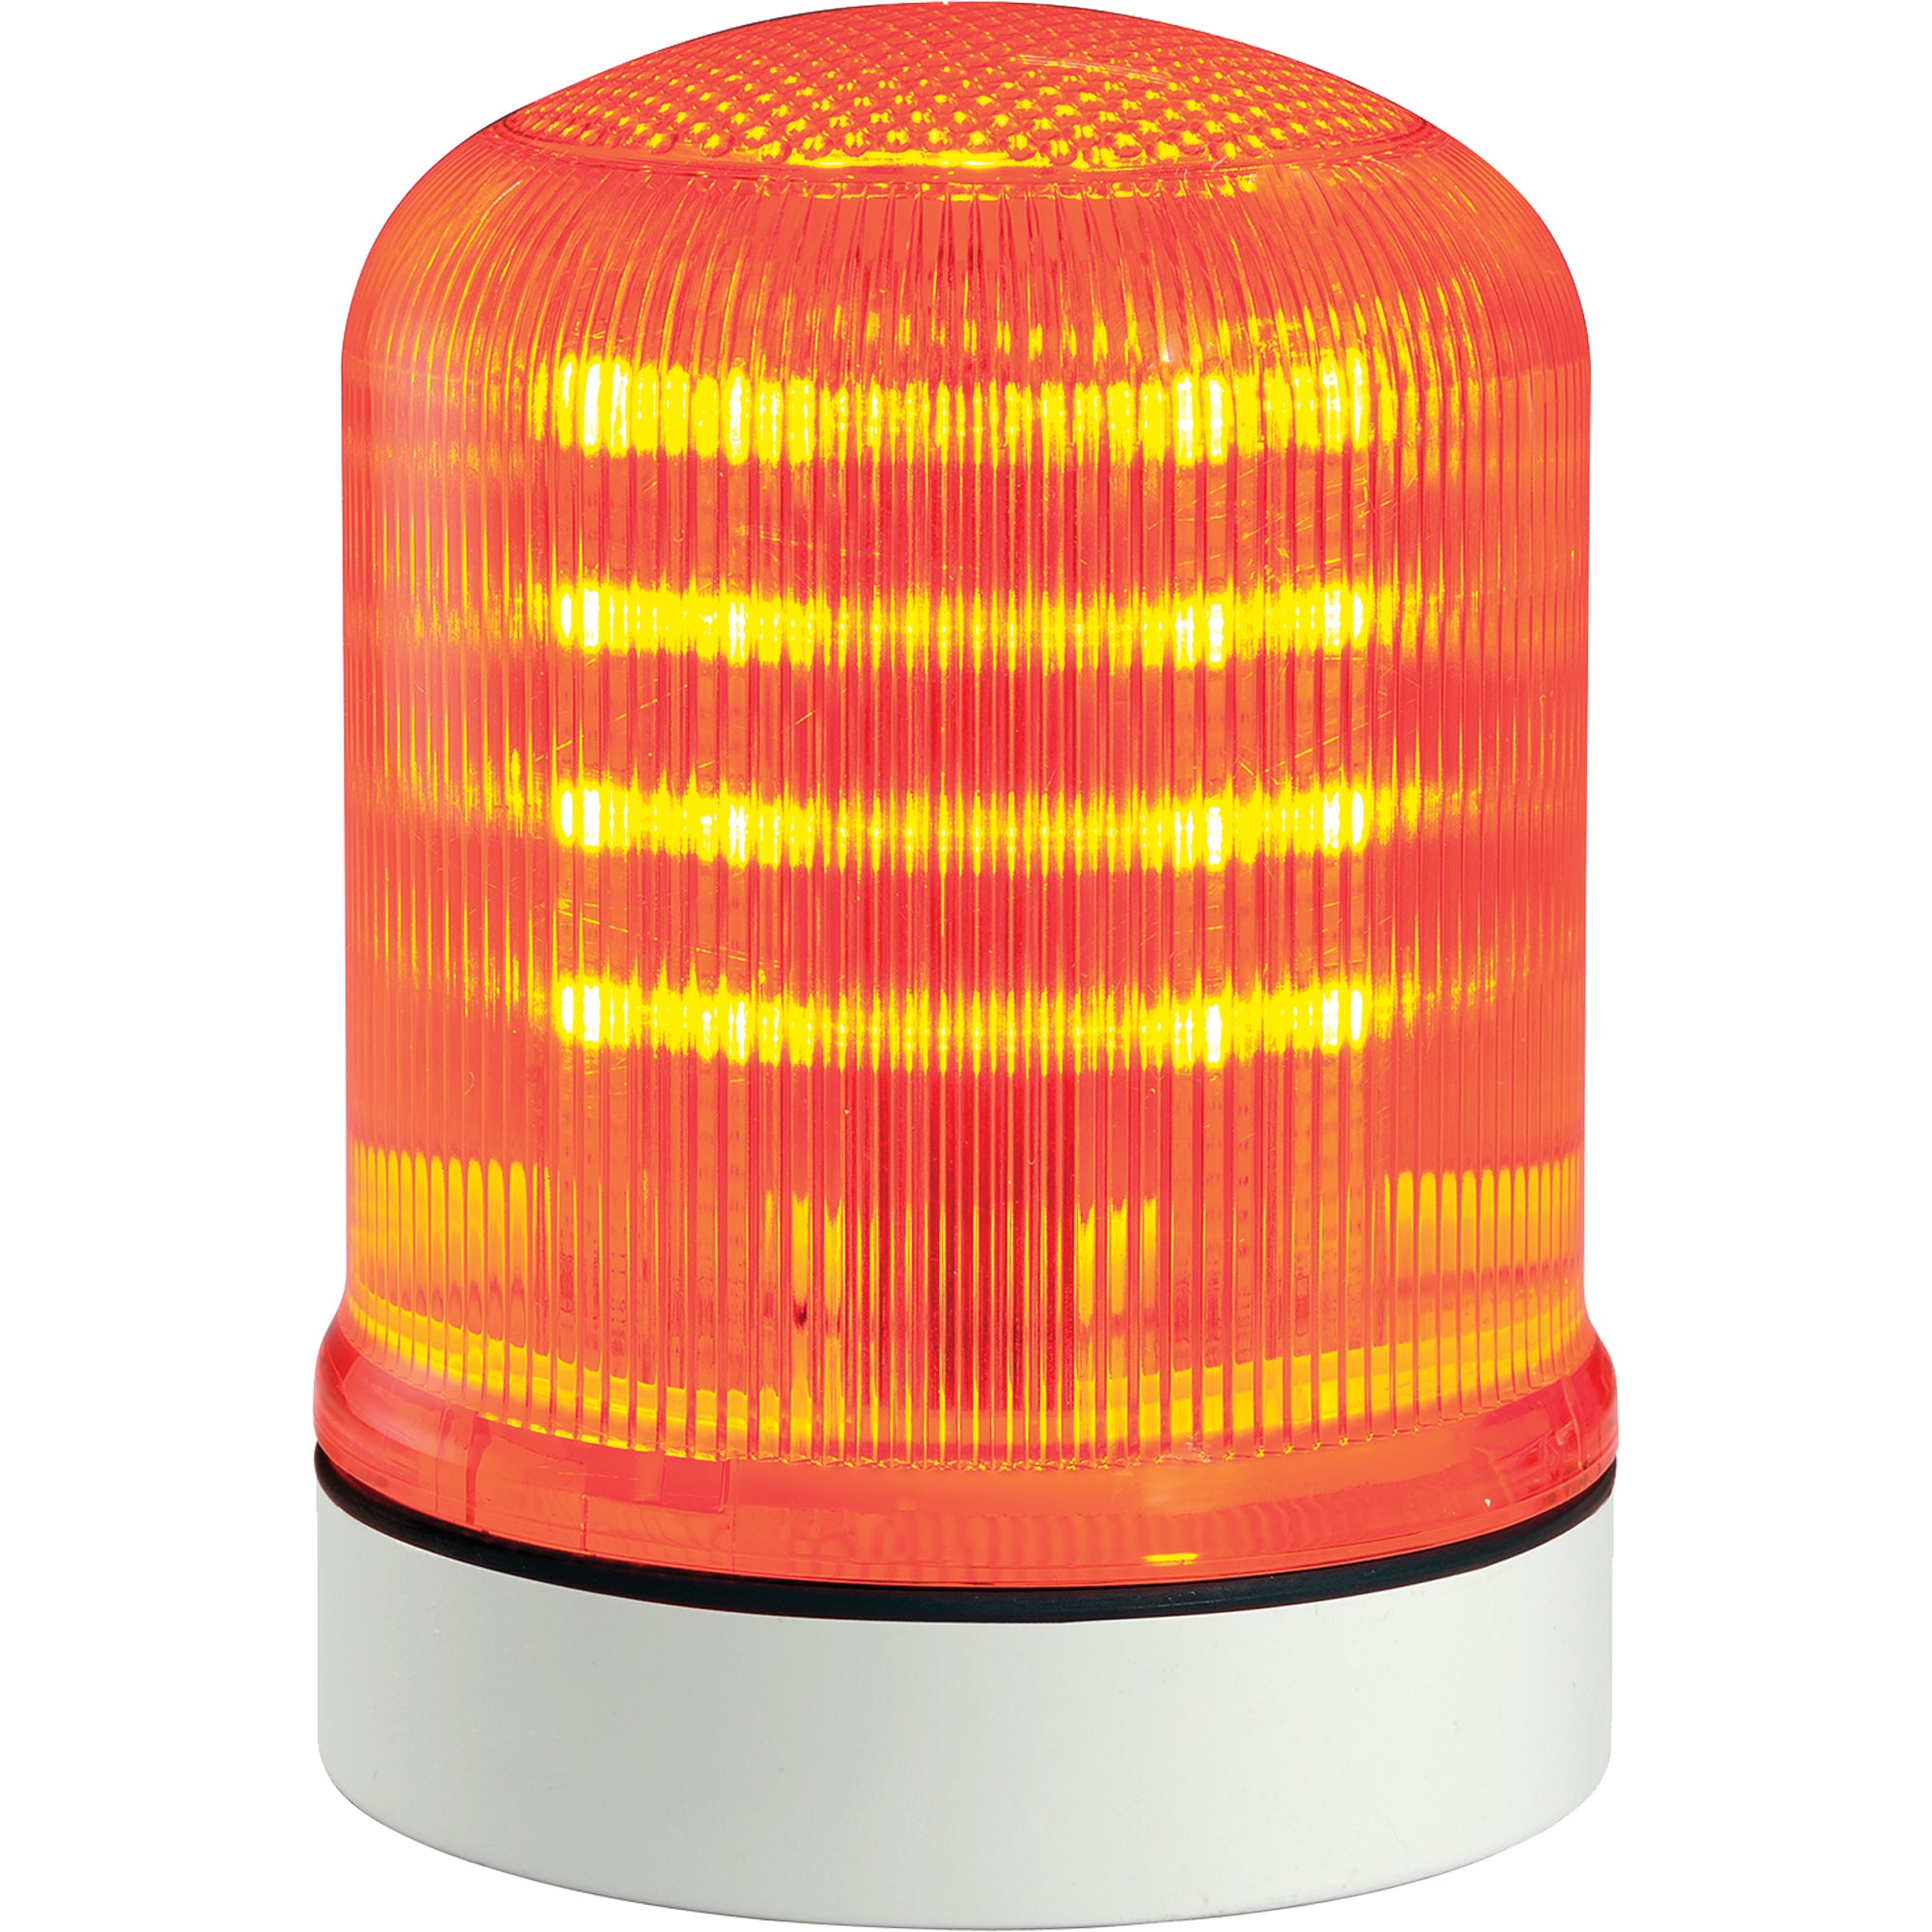 Federal Signal Corporation SLM100A Streamline Modular Multifunctional LED Beacons, Continuous/Flashing/Rotating, Ambe